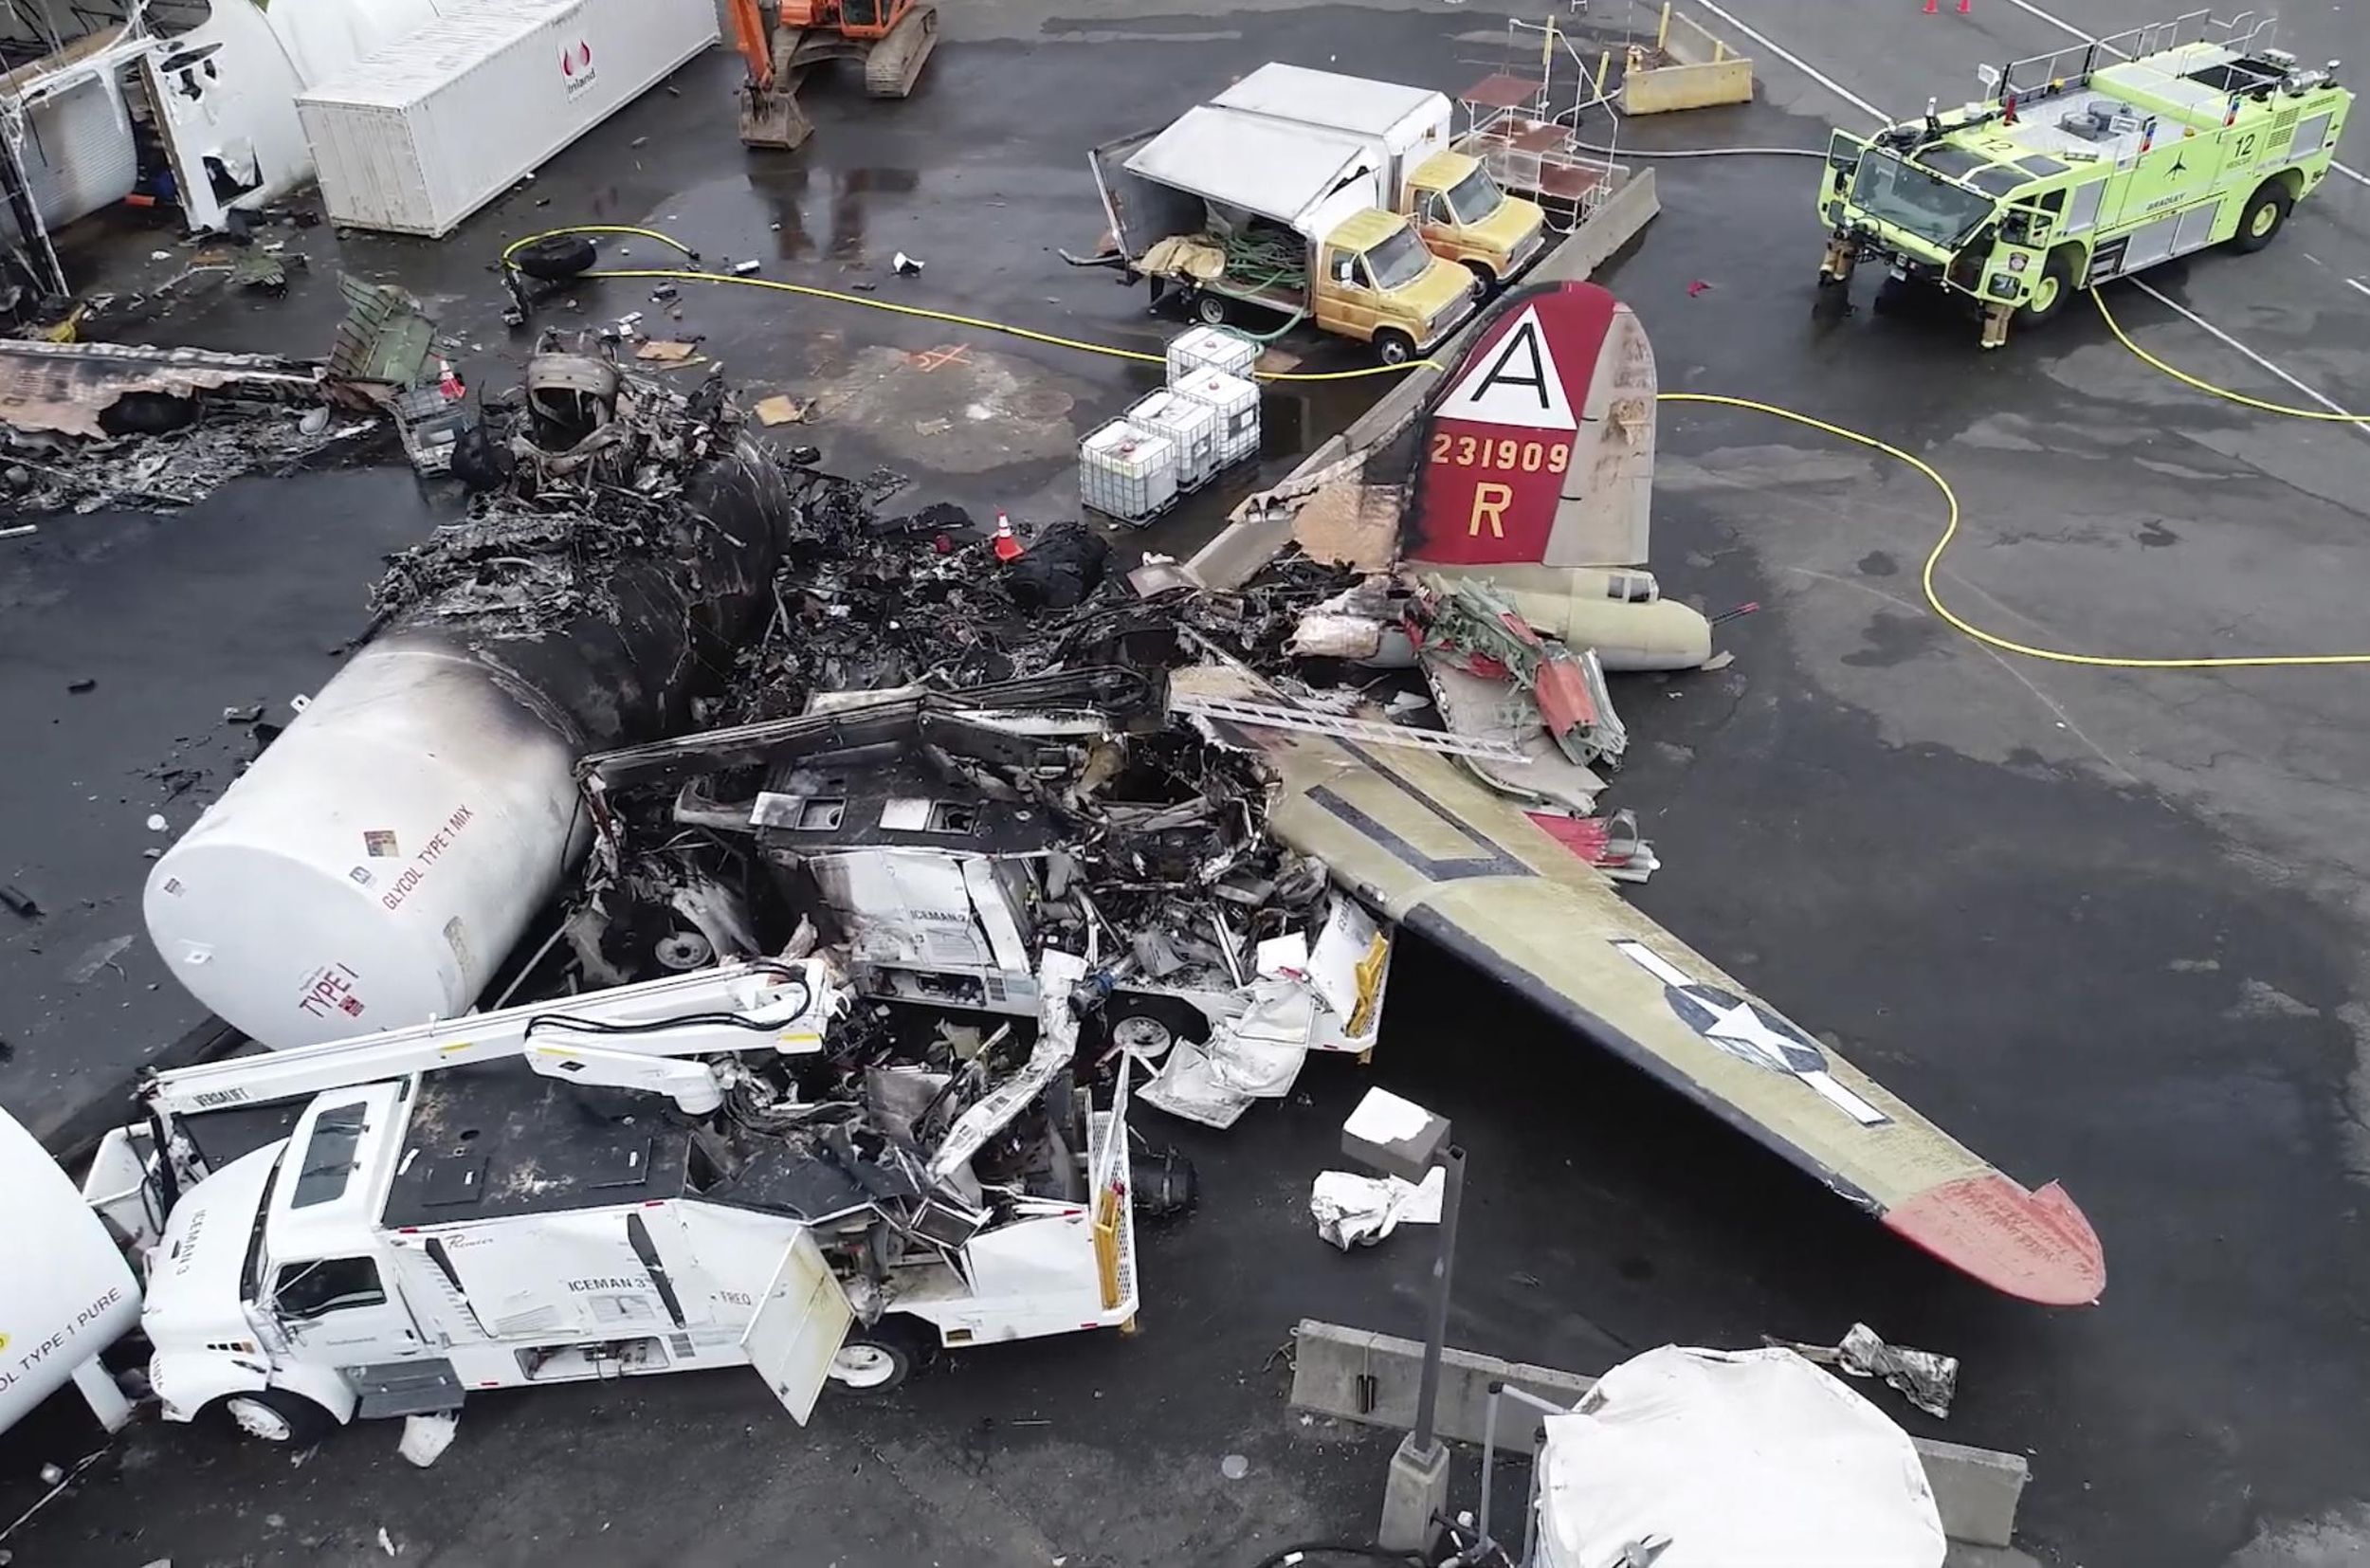 Fuel in fatal B17 crash wasn’t contaminated, report says The